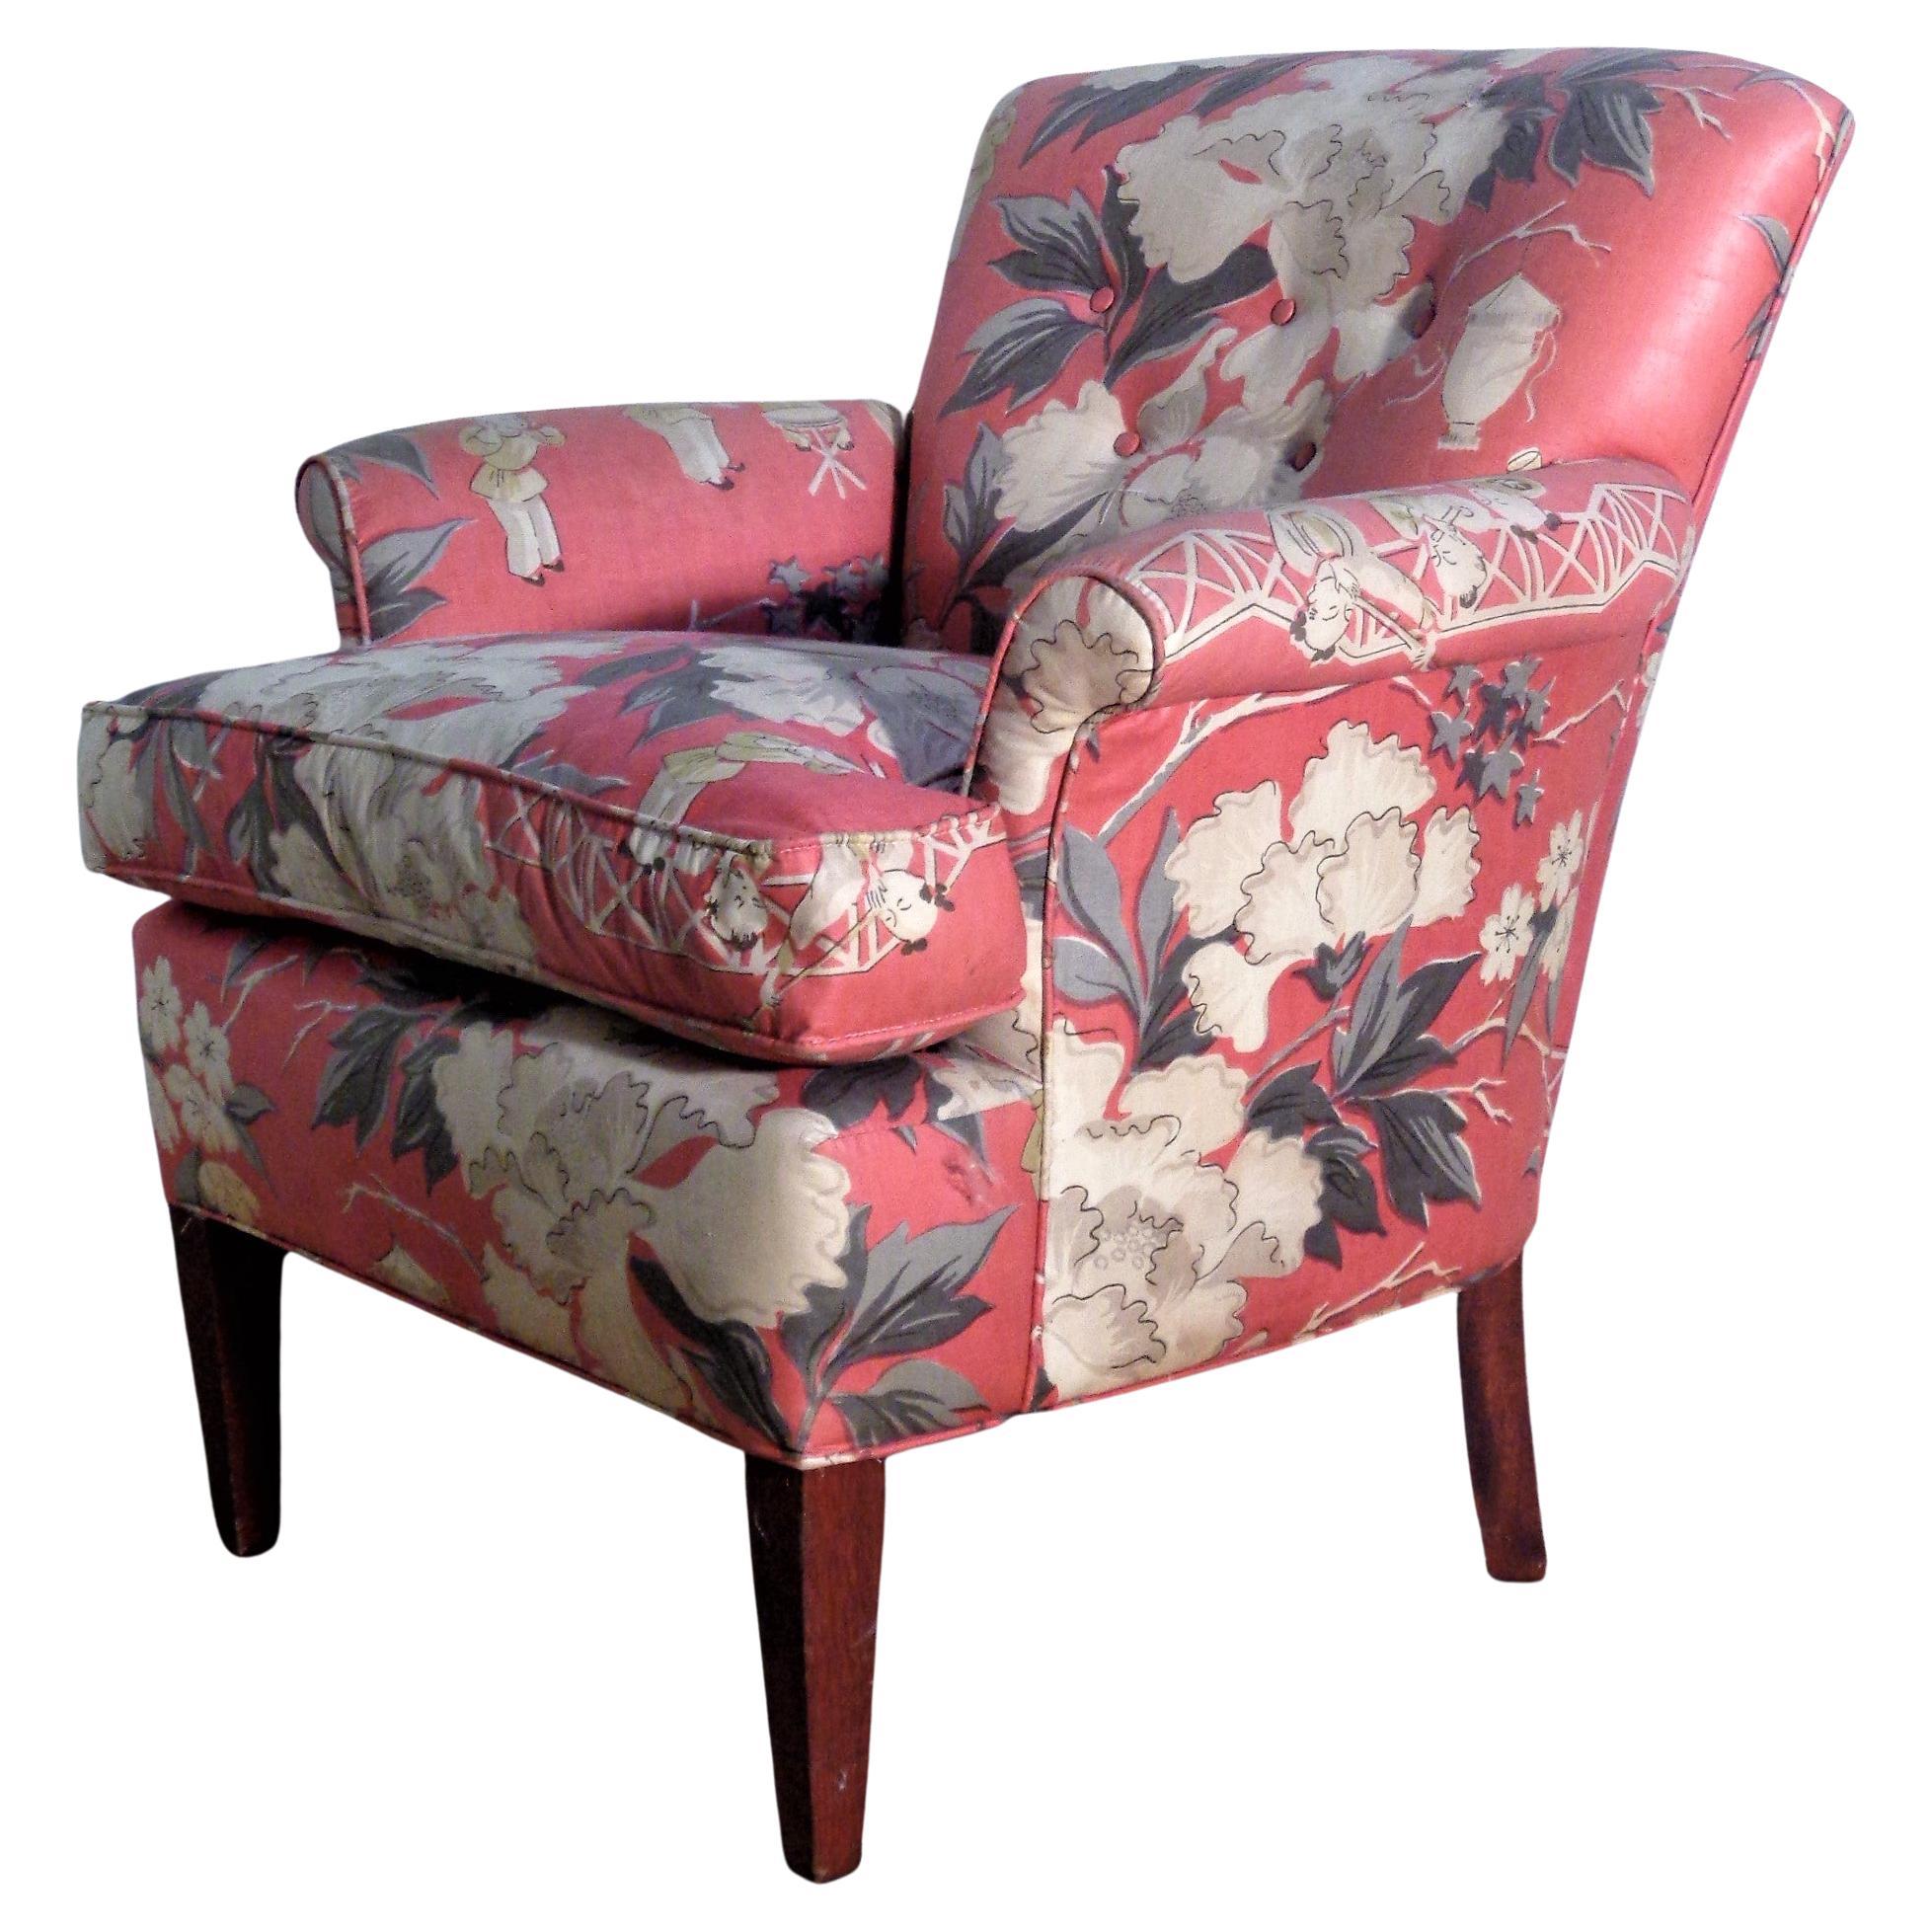 Hollywood Regency  Dorothy Draper Style Original Chinoiserie Upholstered Lounge Chair, 1940's For Sale